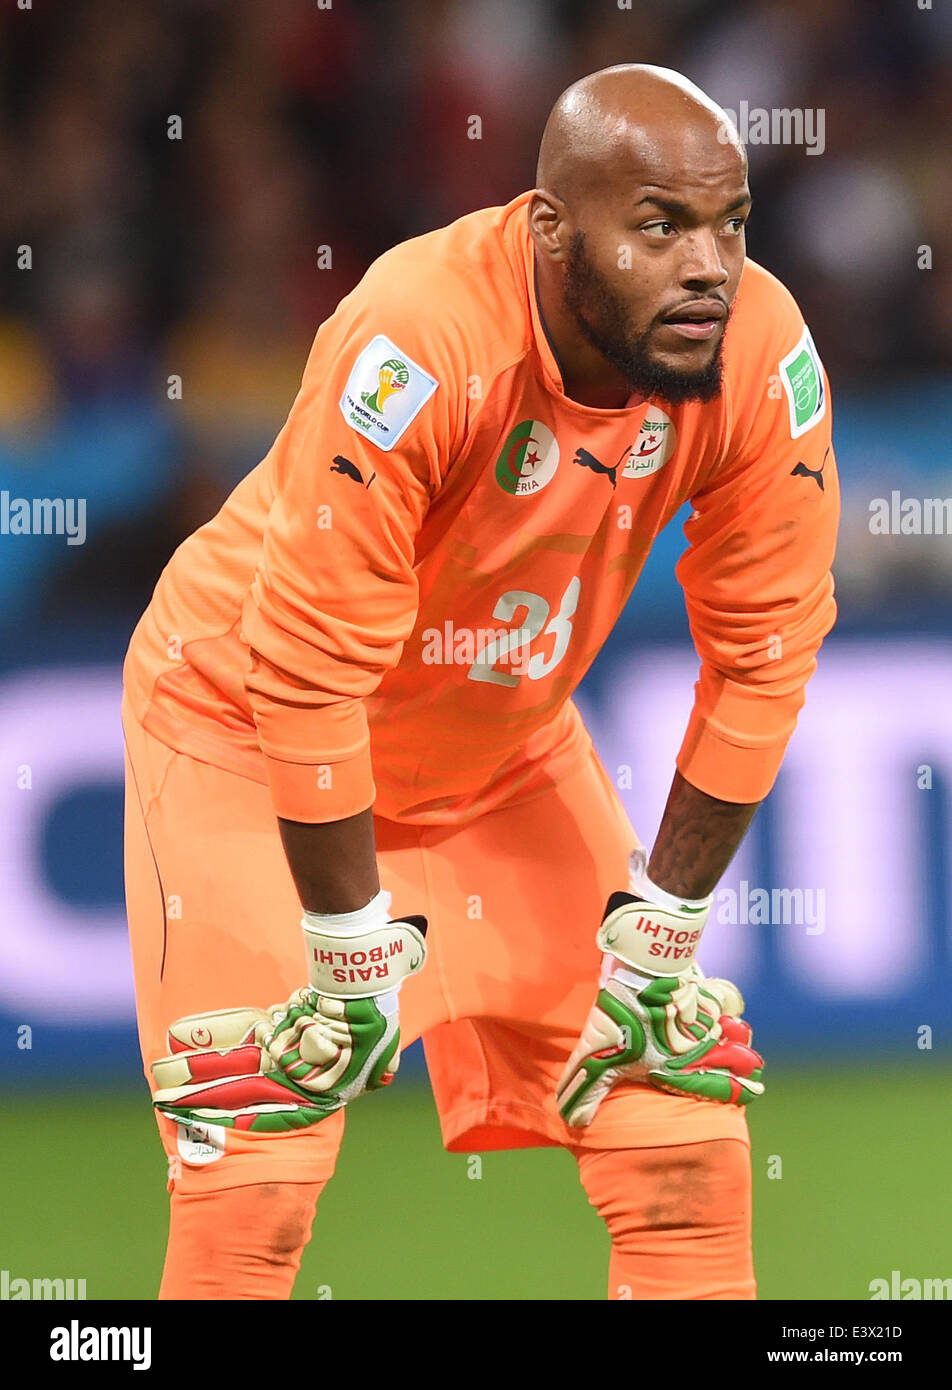 Porto Alegre, Brazil. 30th June, 2014. Goalkeeper Rais Mbolhi of Algeria seen during the FIFA World Cup 2014 round of 16 soccer match between Germany and Algeria at the Estadio Beira-Rio in Porto Alegre, Brazil, 30 June 2014. Photo: Andreas Gebert/dpa/Alamy Live News Stock Photo